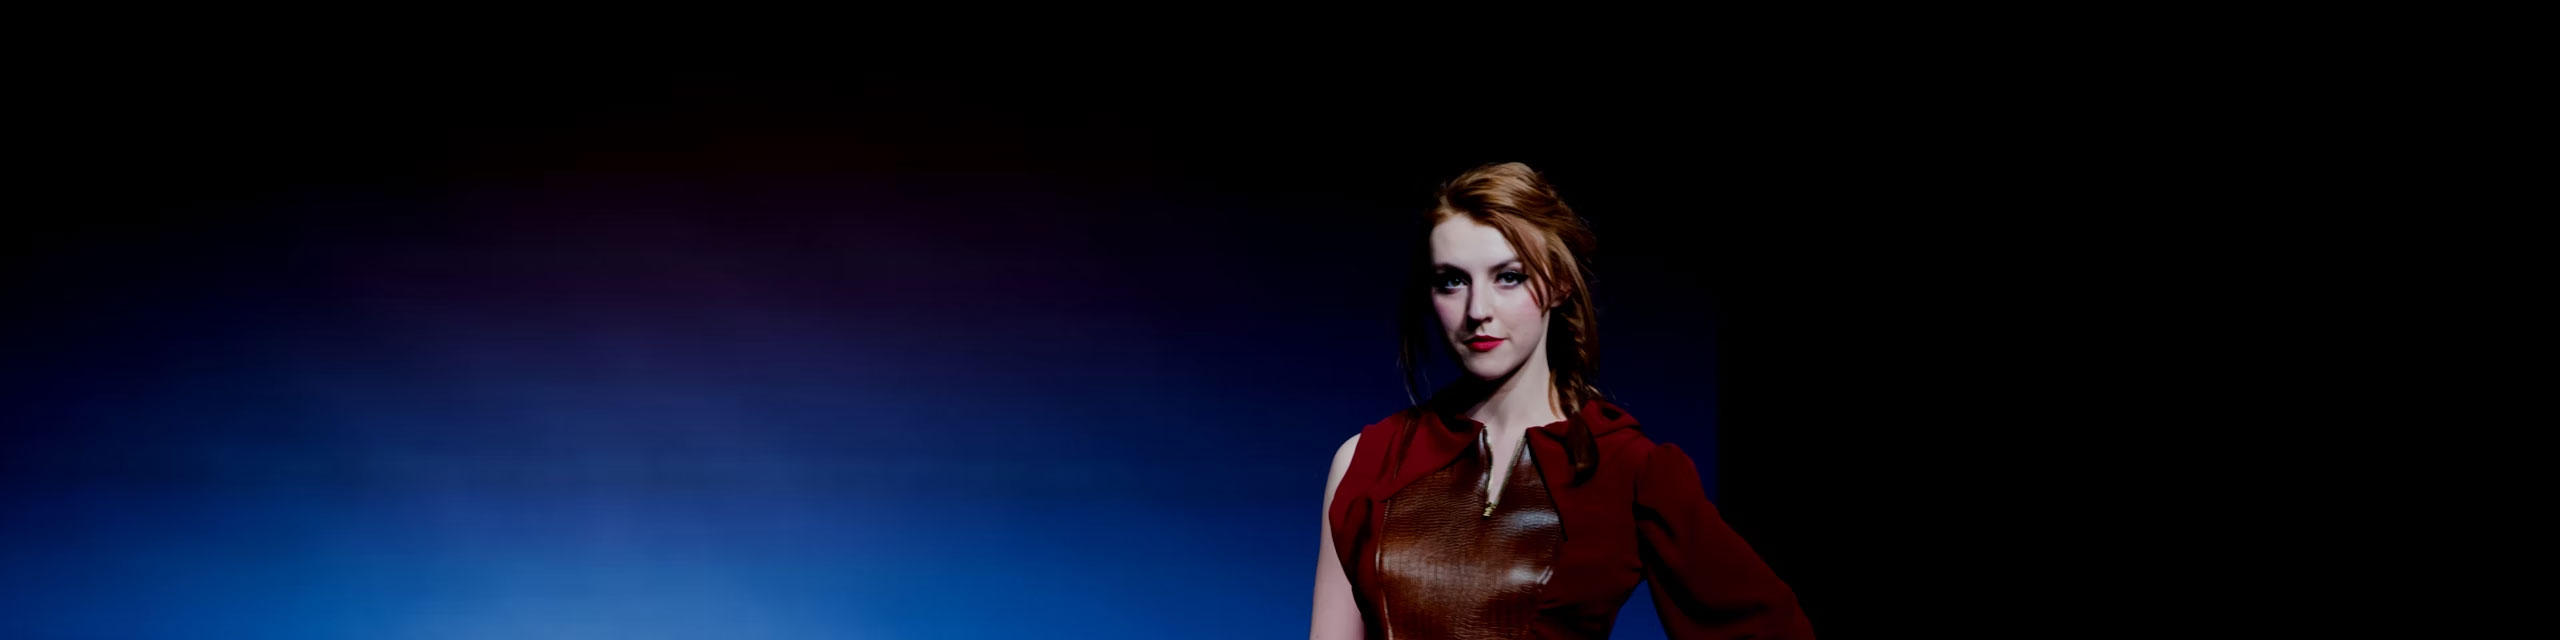 Female model in burgundy outfit in front of navy blue background.